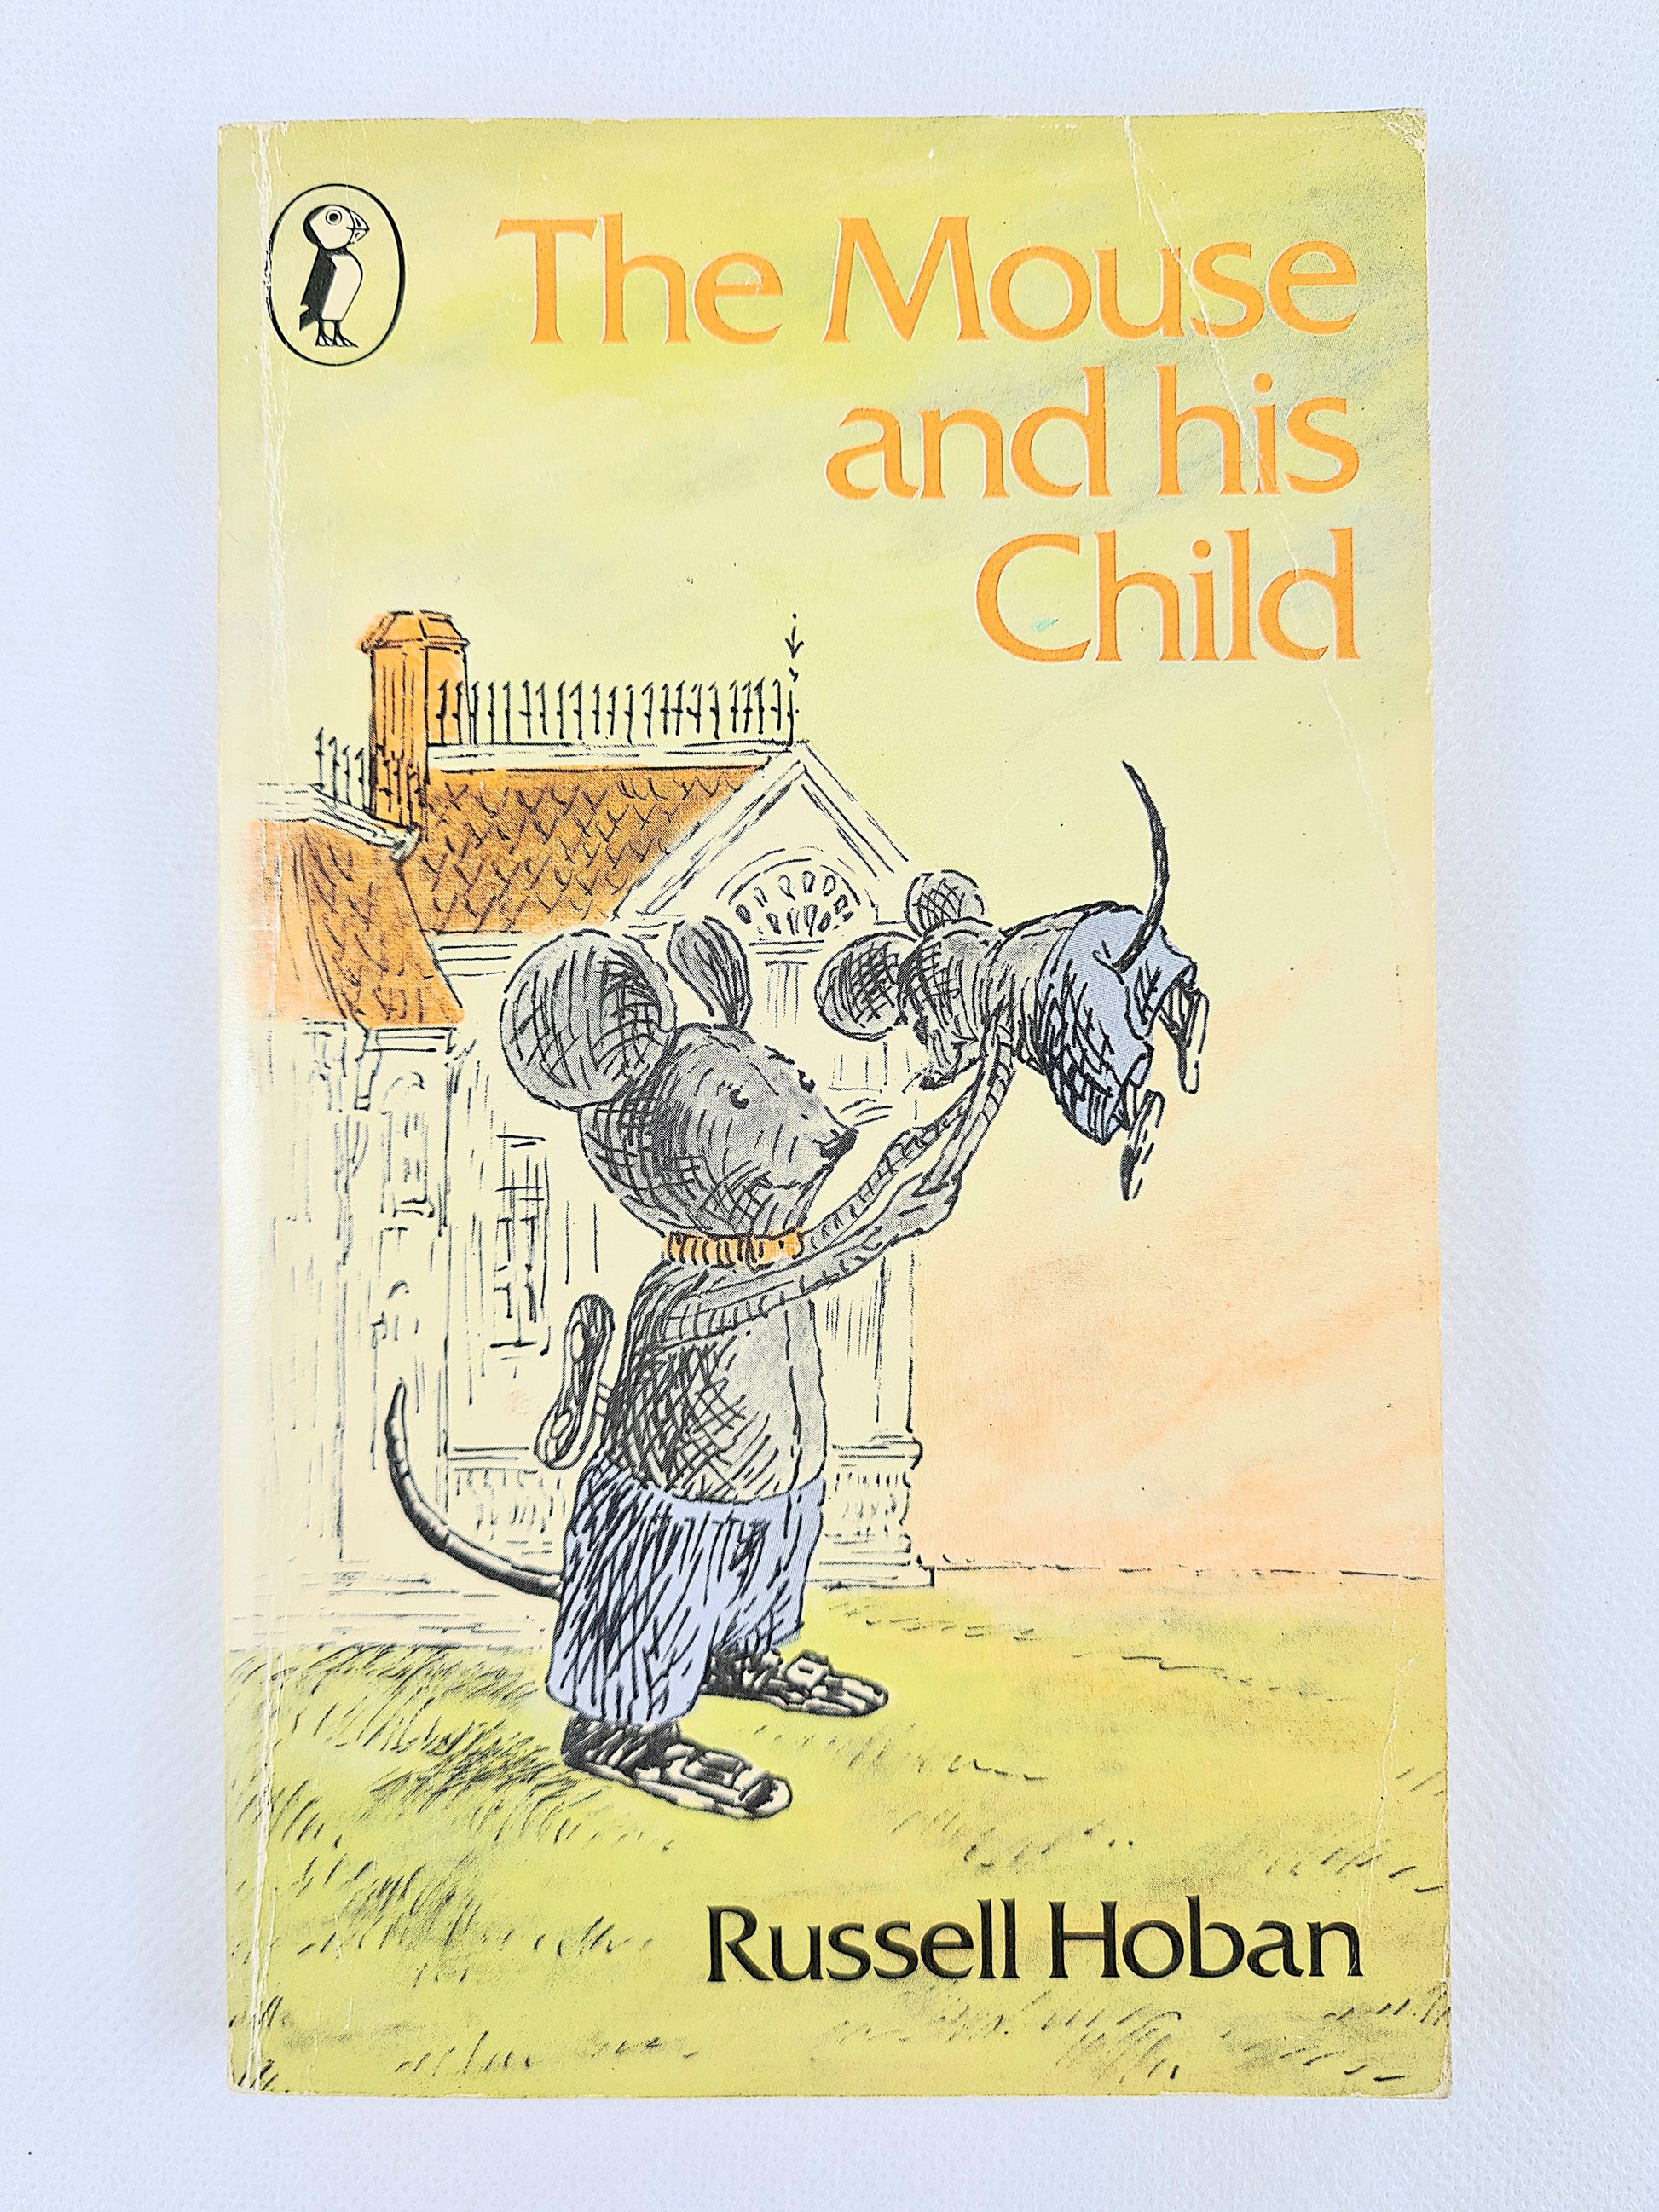 The Mouse and his Child. Vintage childrens book 